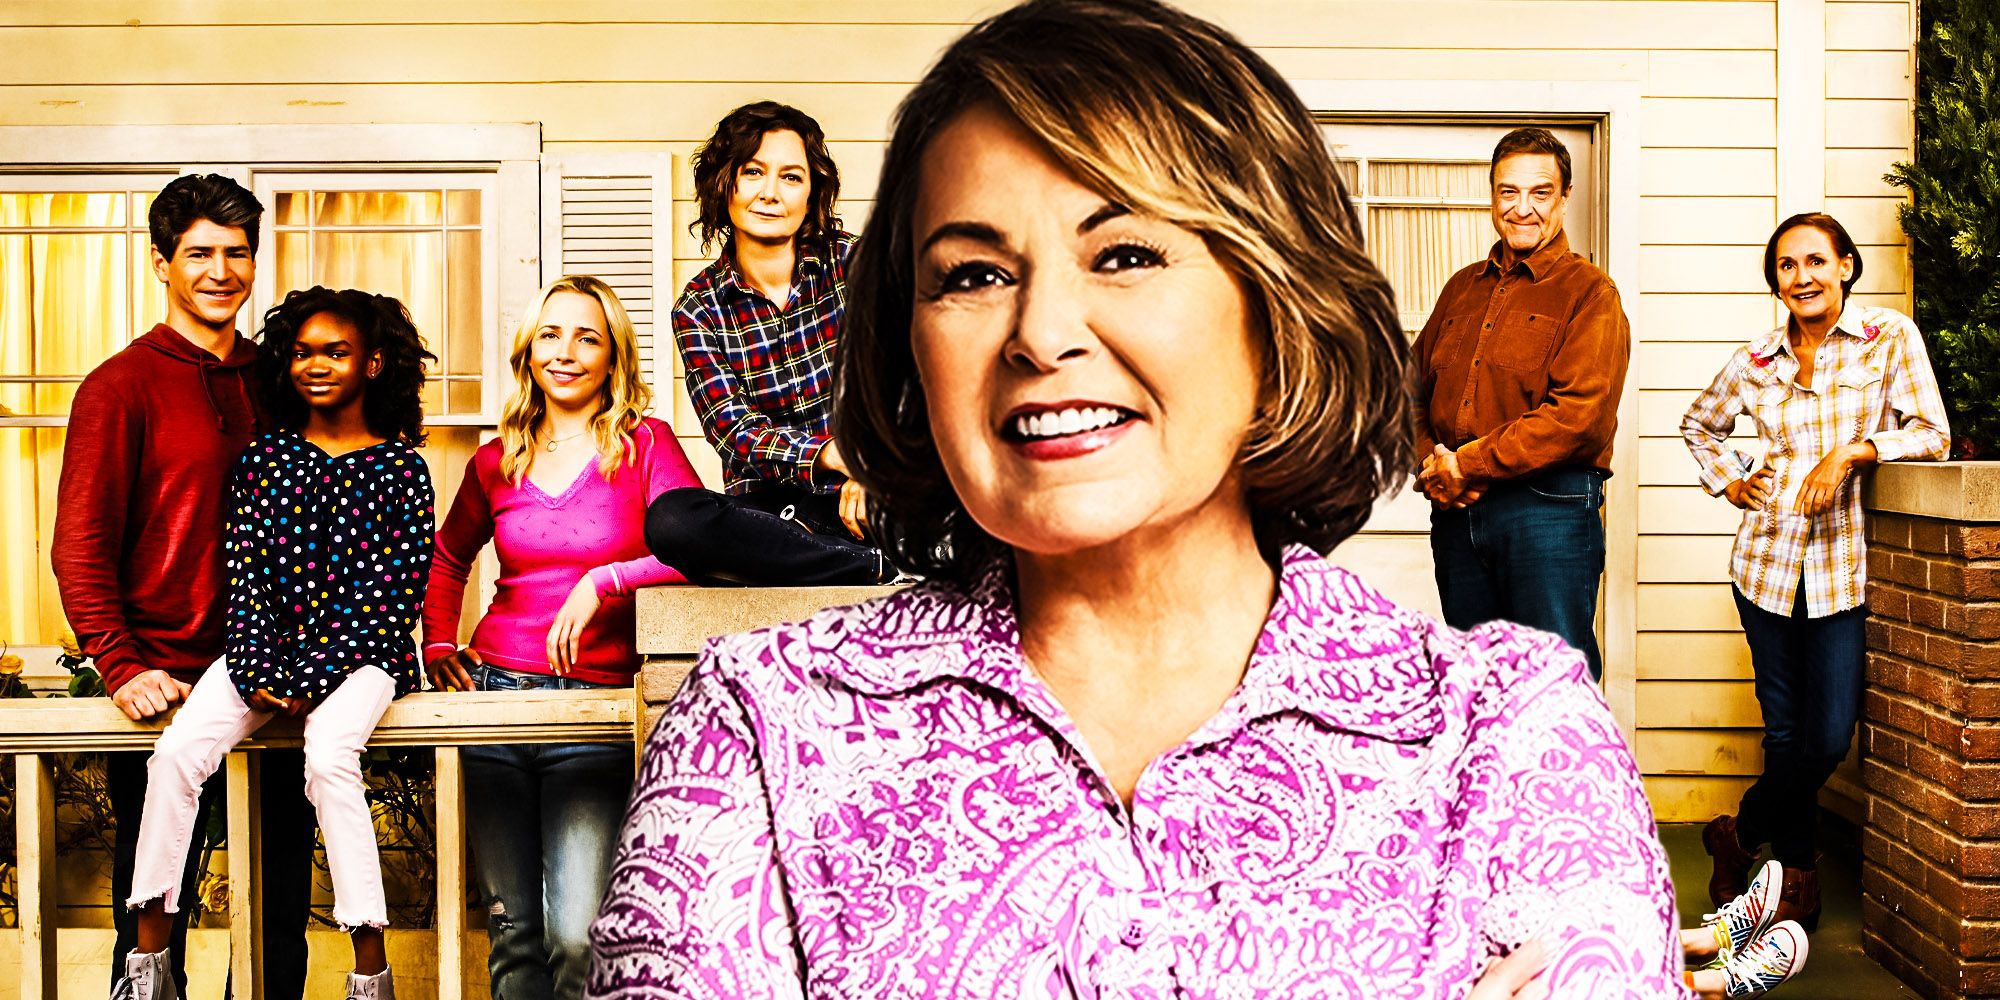 Roseanne character in The conners